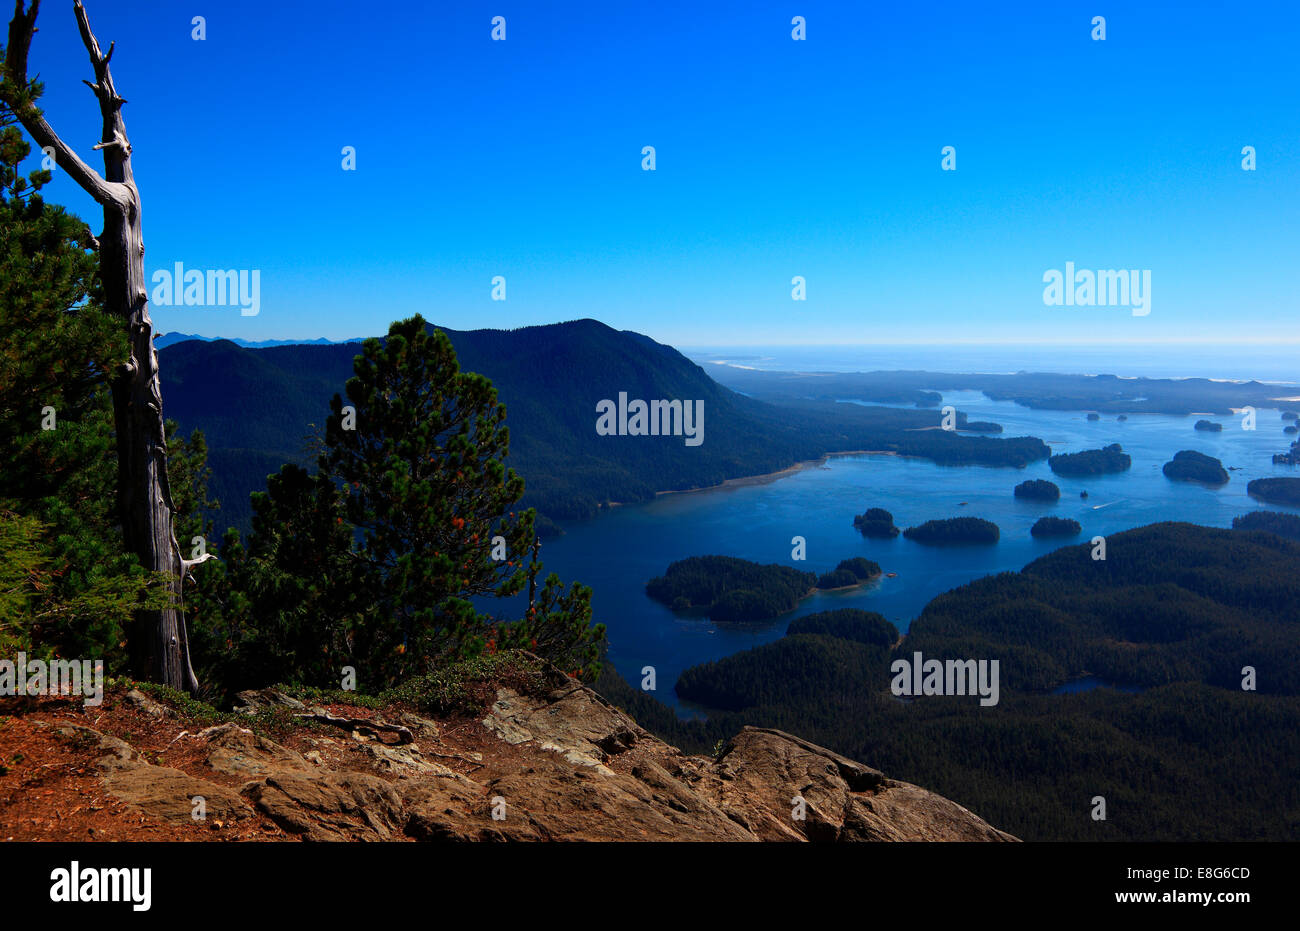 View from the top of Lone cone mountain looking at part of meares island and clayoquot sound Stock Photo